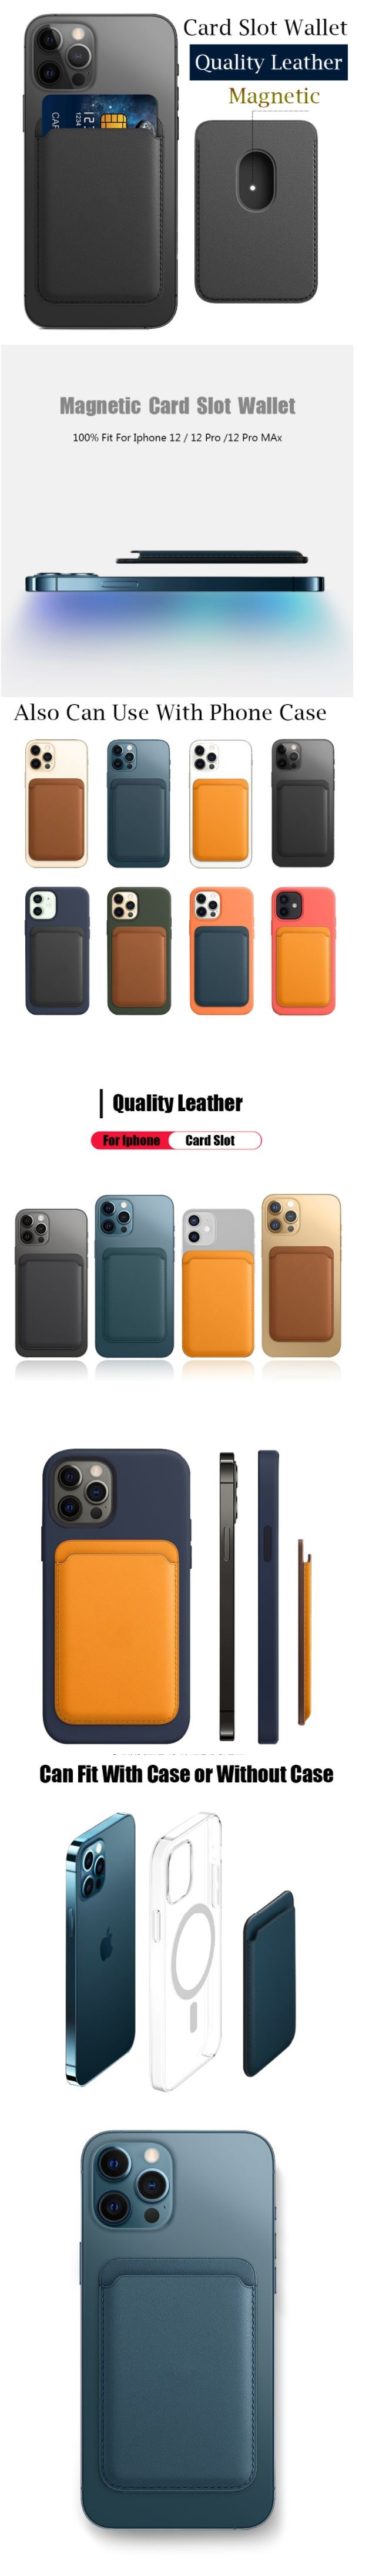 Magsafe Card Case, iPhone 12 Leather Case, Magnetic iPhone Sticker, iPhone Leather Cover, iPhone Shell, iPhone 12 Card Pocket, IPhone 12 Pro Max Magnetic Wallet,